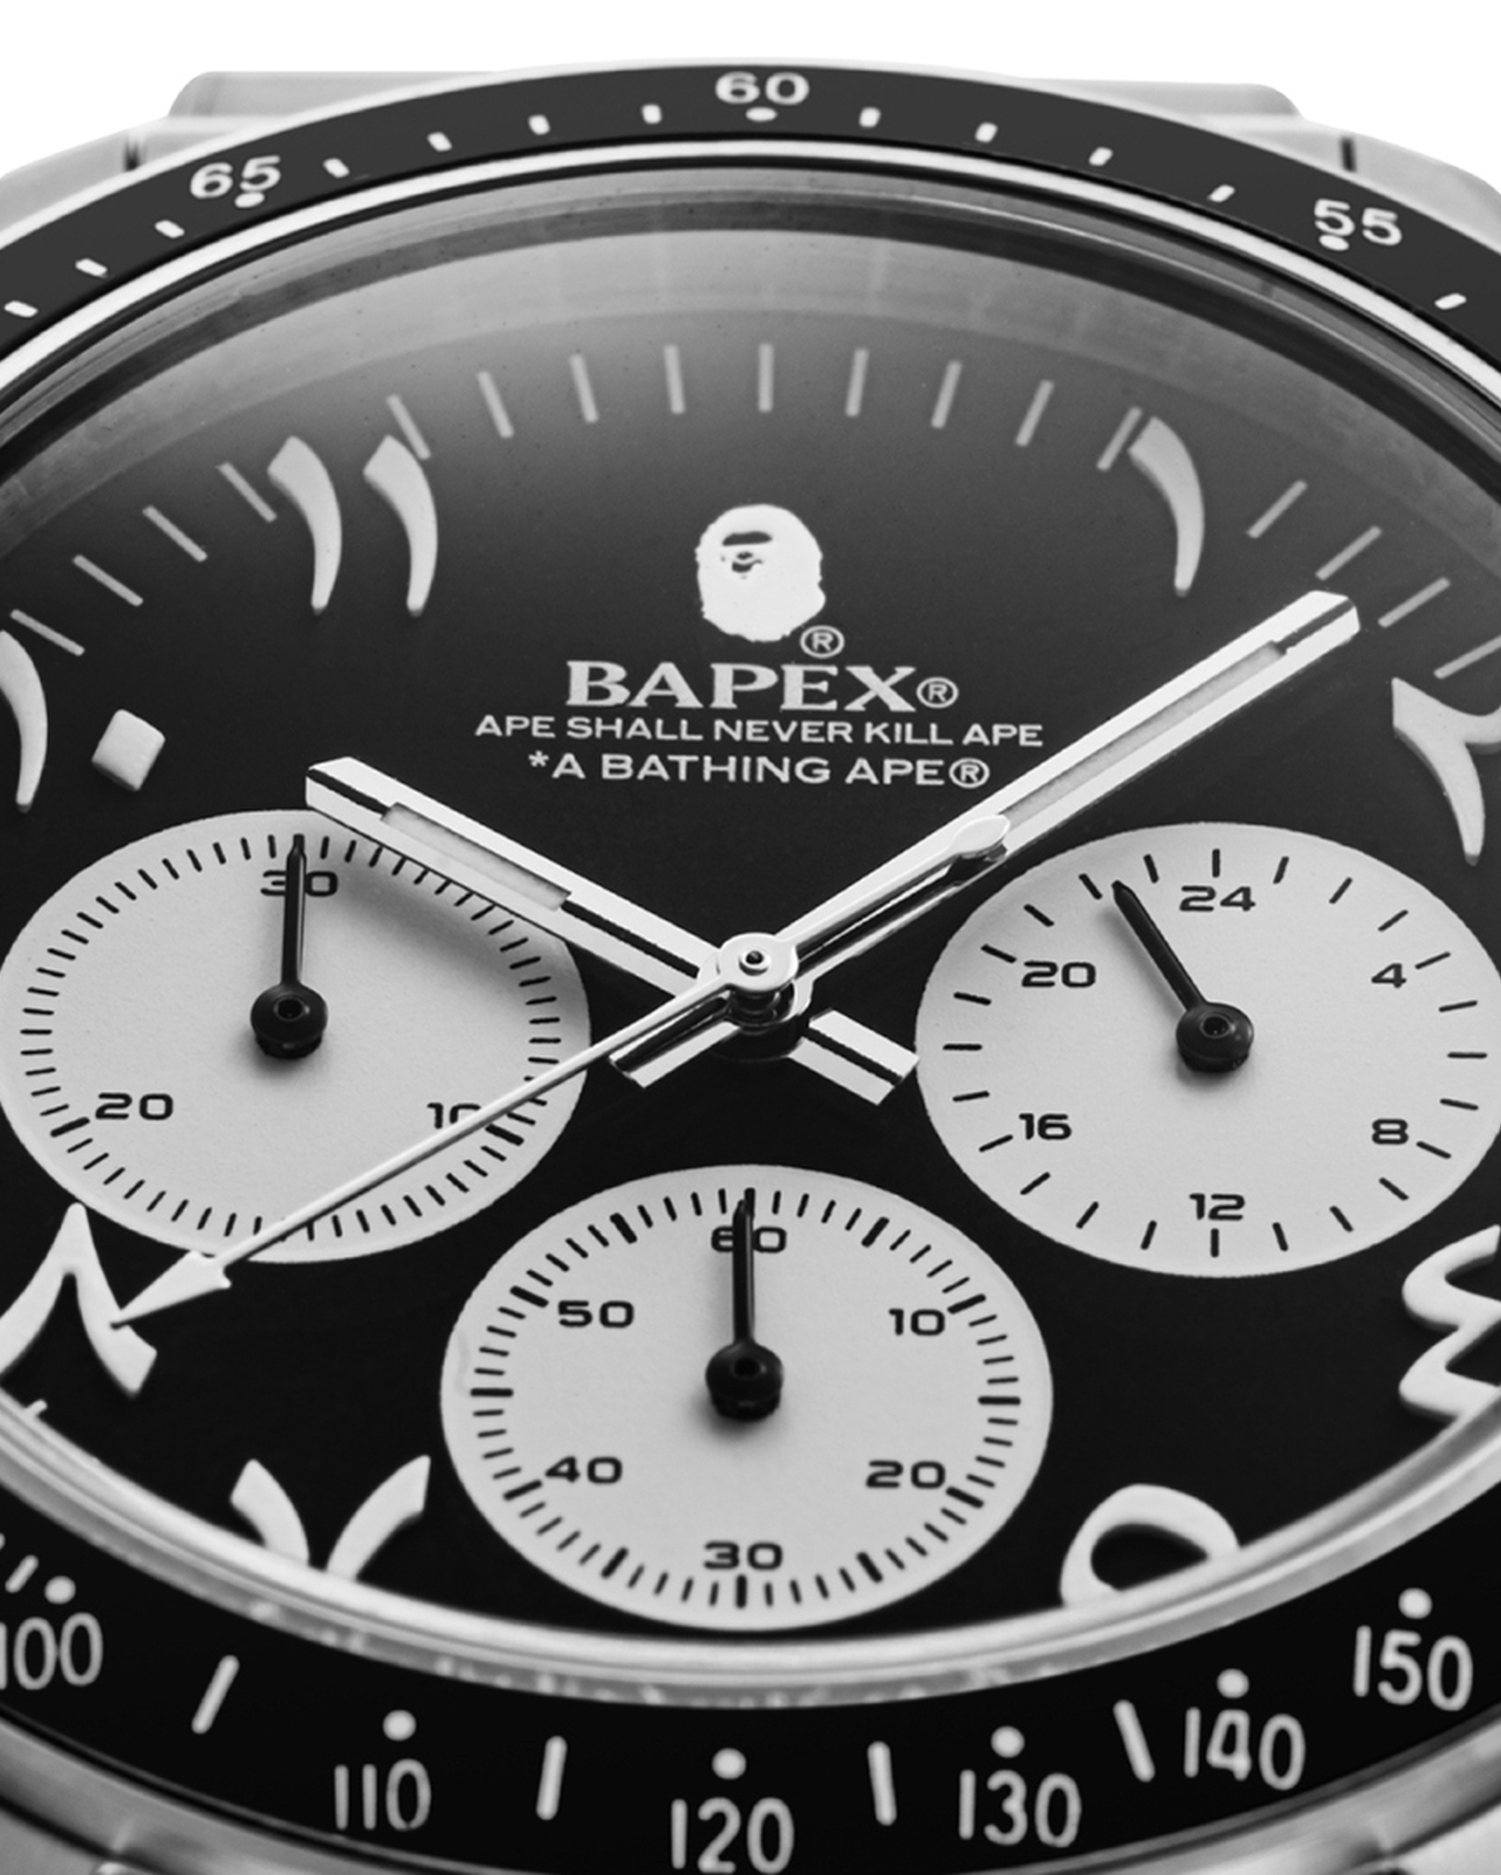 Bathing Ape - Bapex - Type 1 Lavender Watch Unboxing and Sticker Removal -  YouTube